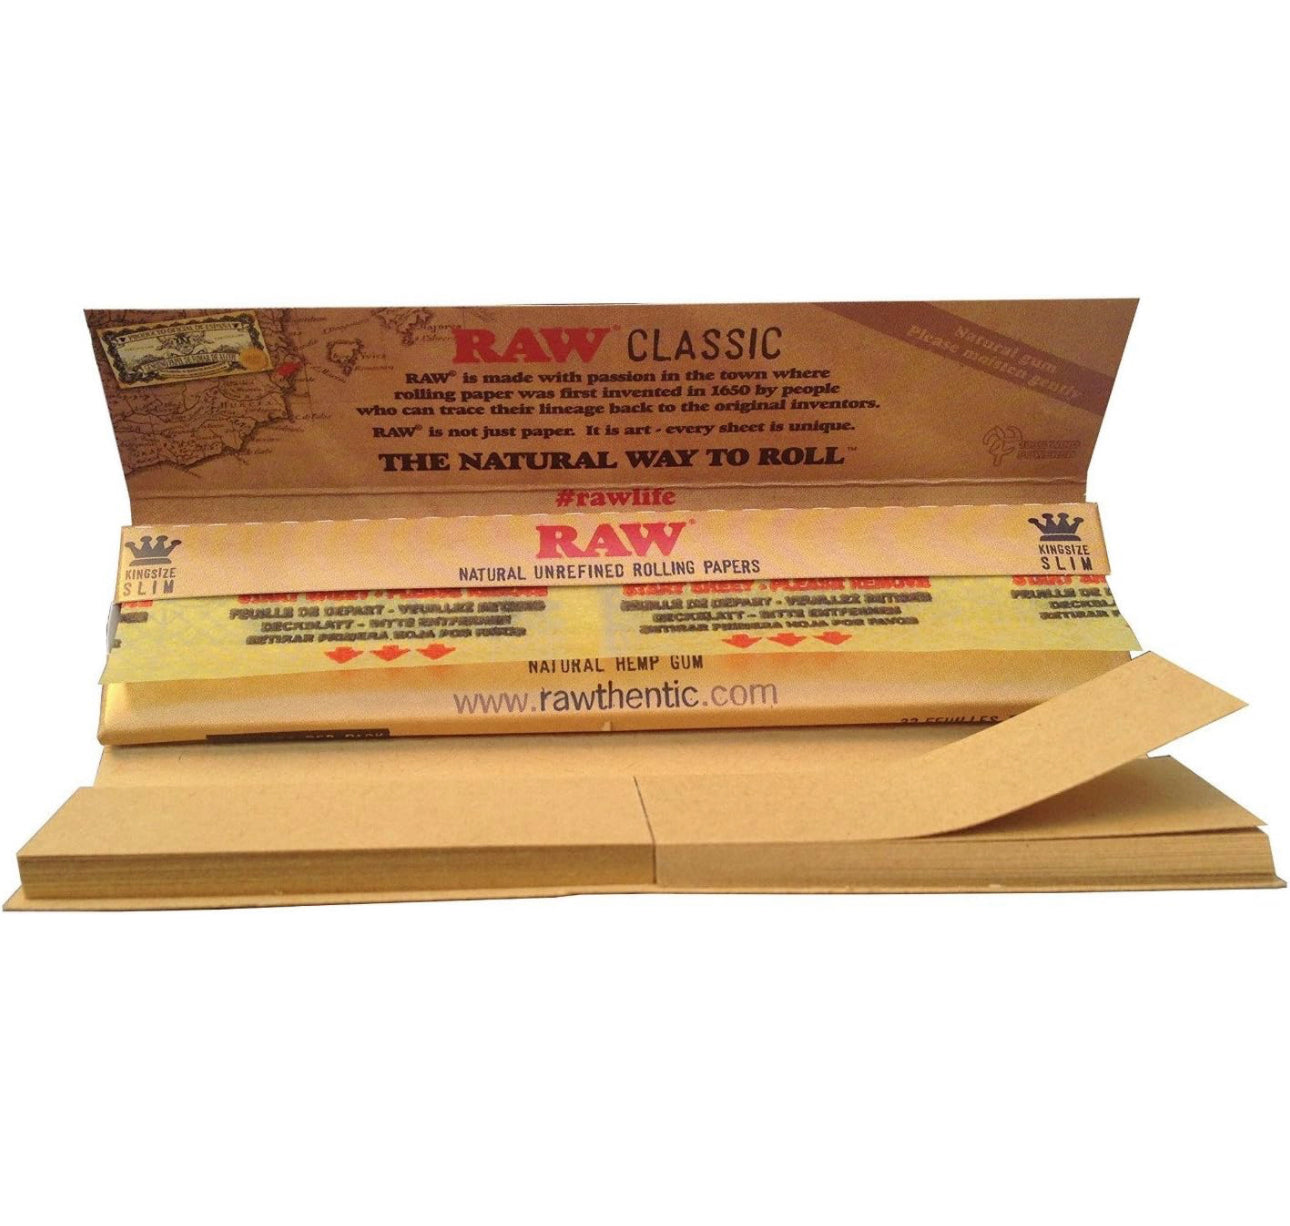 RAW King size papers with tips